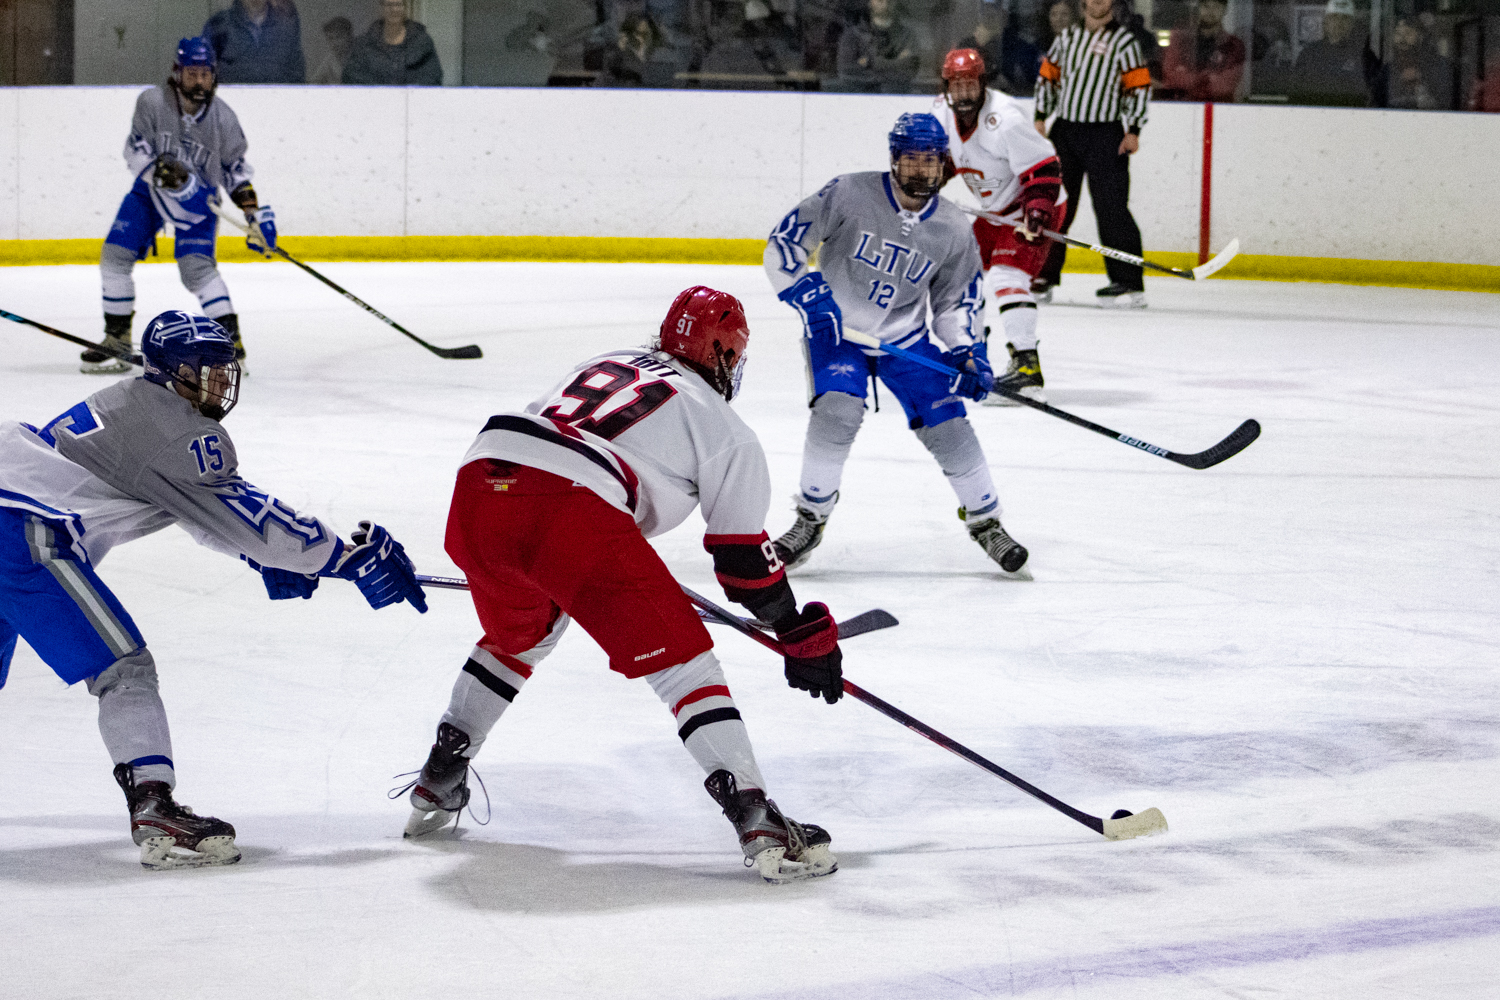 Men's Hockey completes weekend sweep of the Cougars